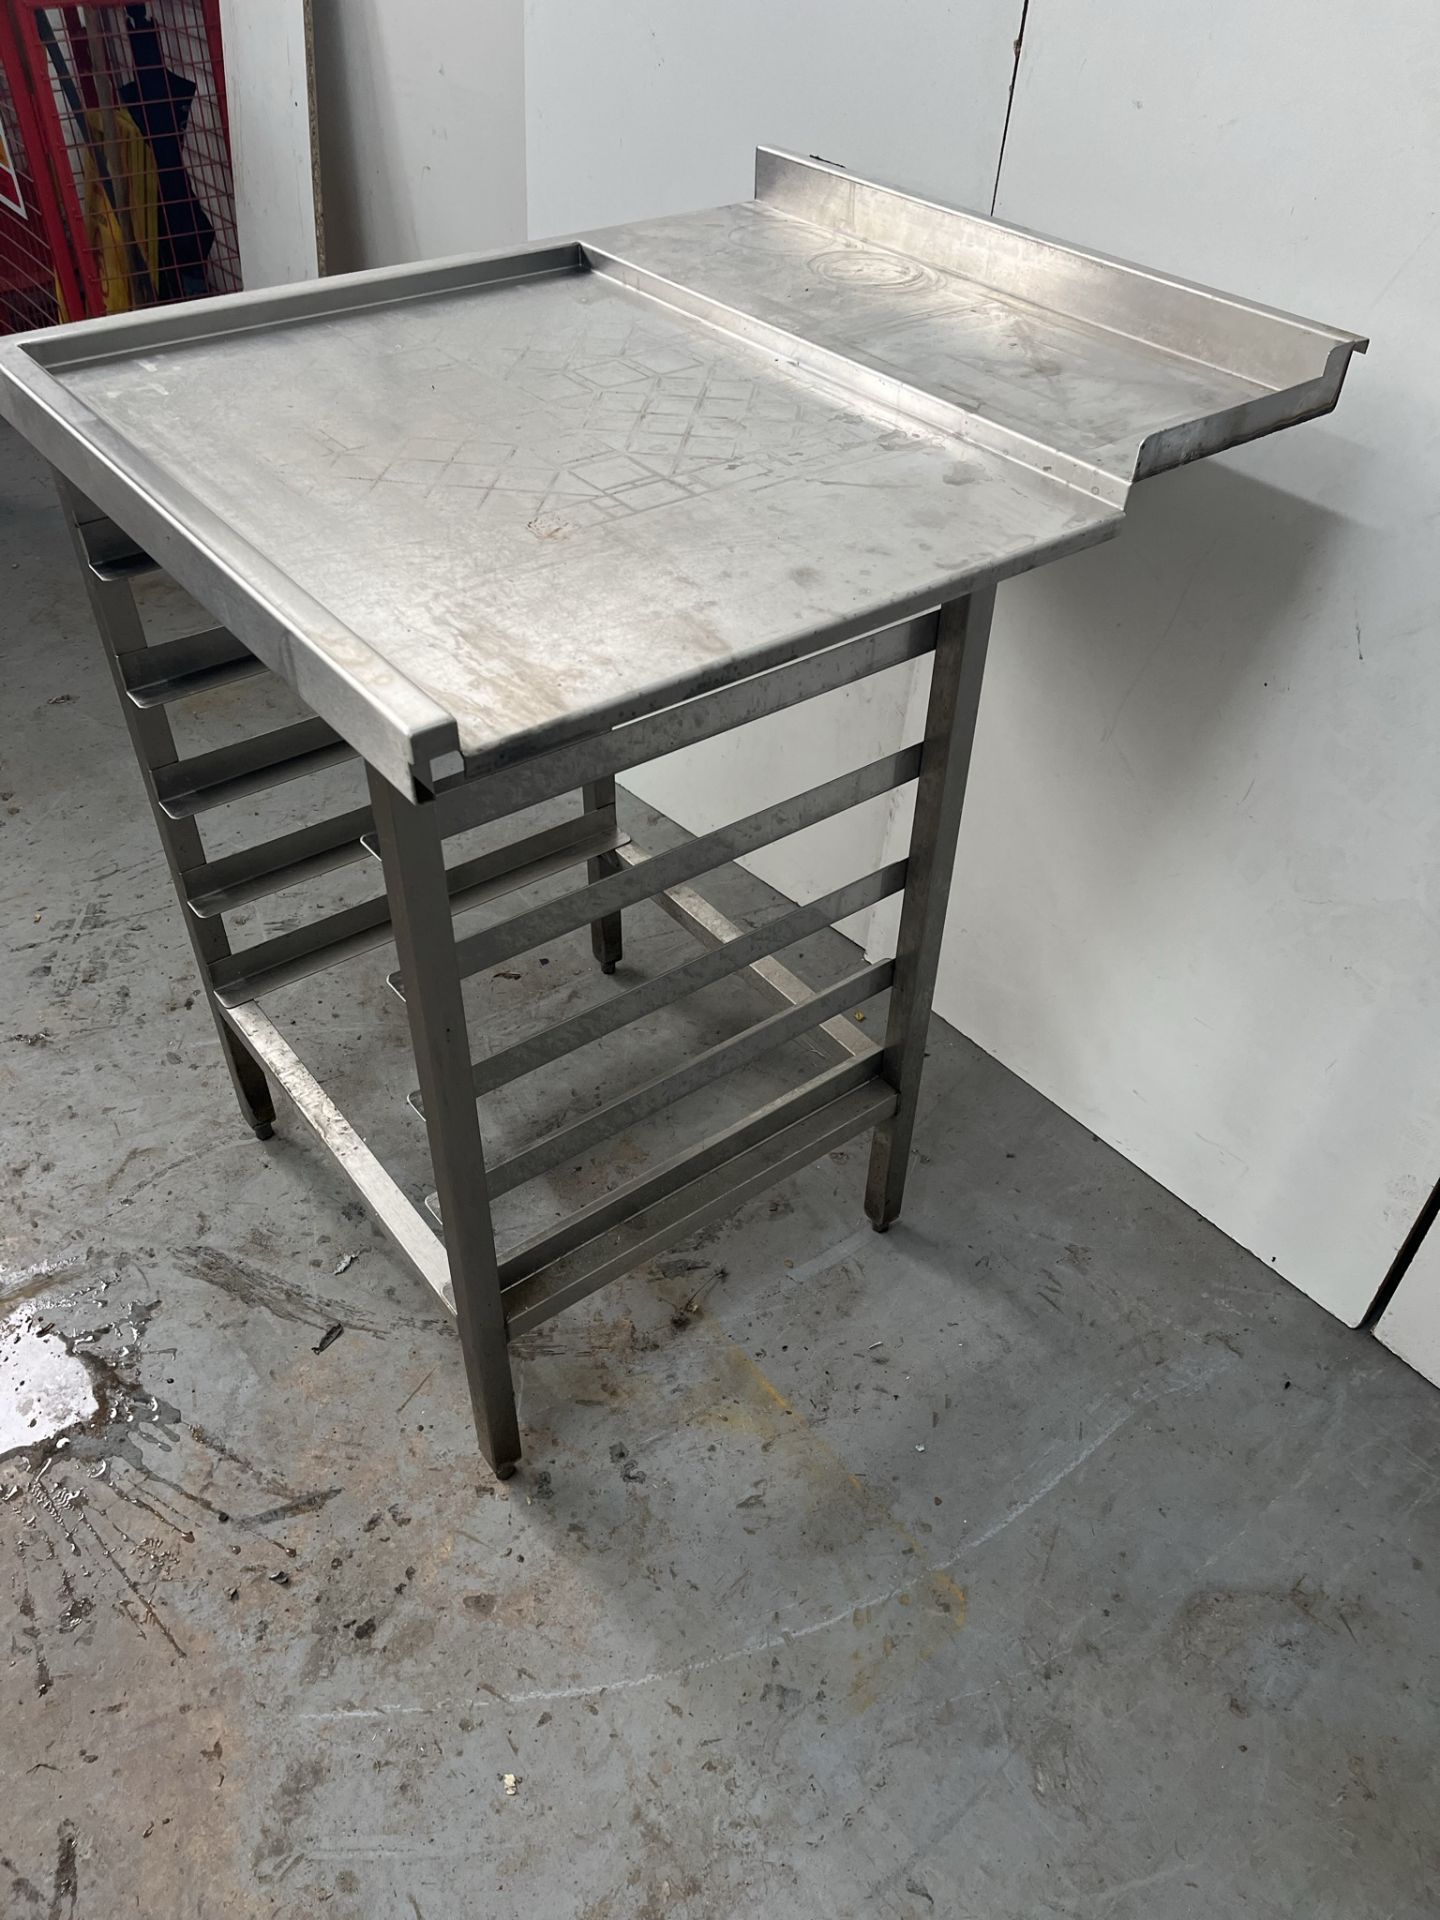 700mm Stainless Steel Catering Preperation Table - Bild 3 aus 5